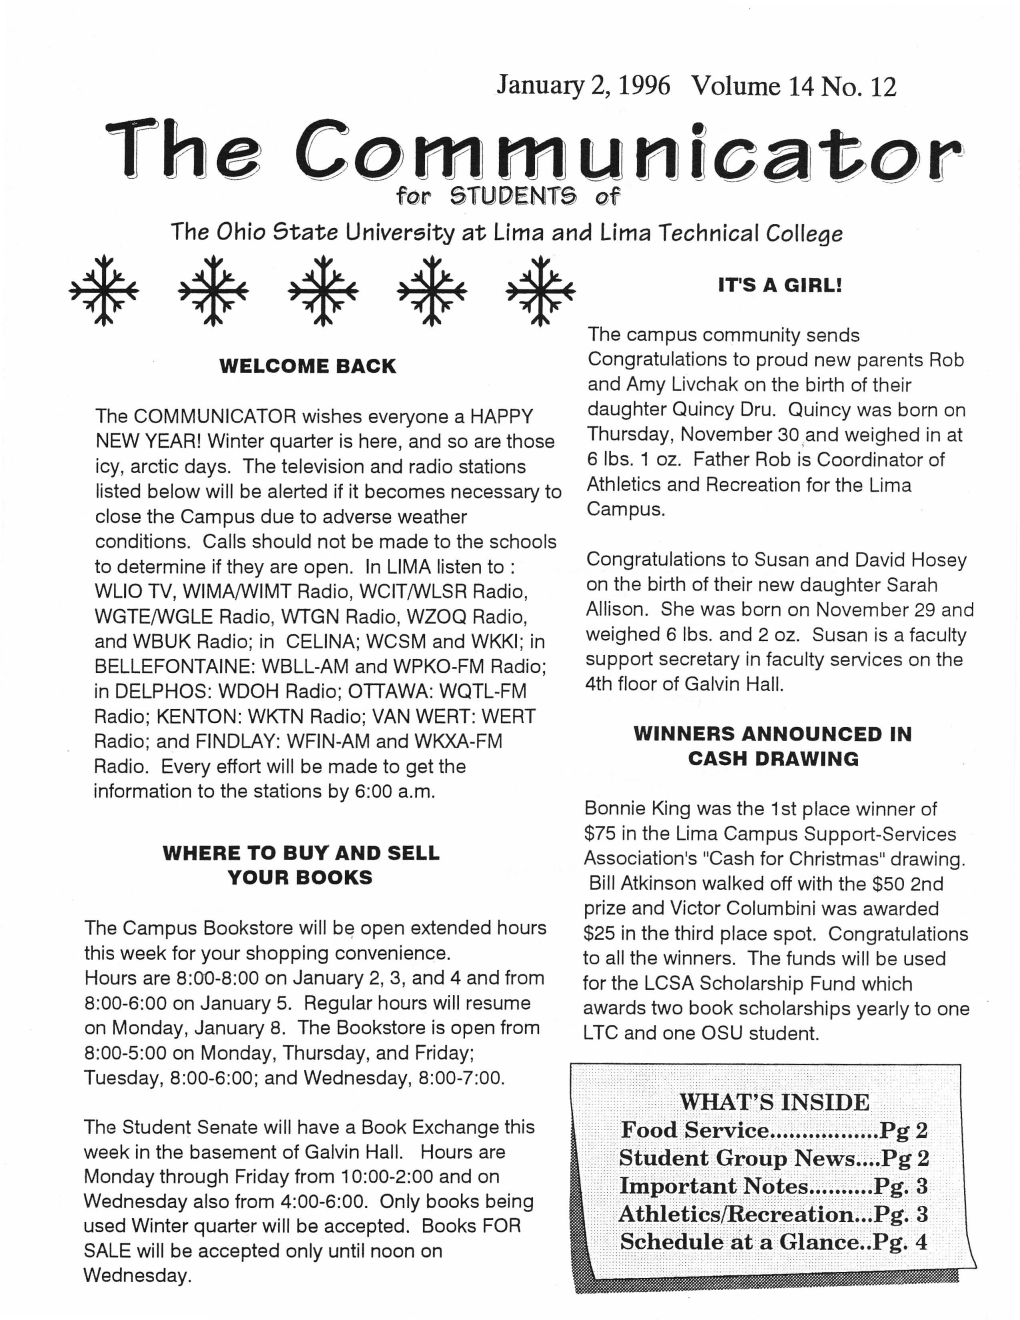 The Communicator for STUDENTS of the Ohio State University at Lima and Lima Technical College